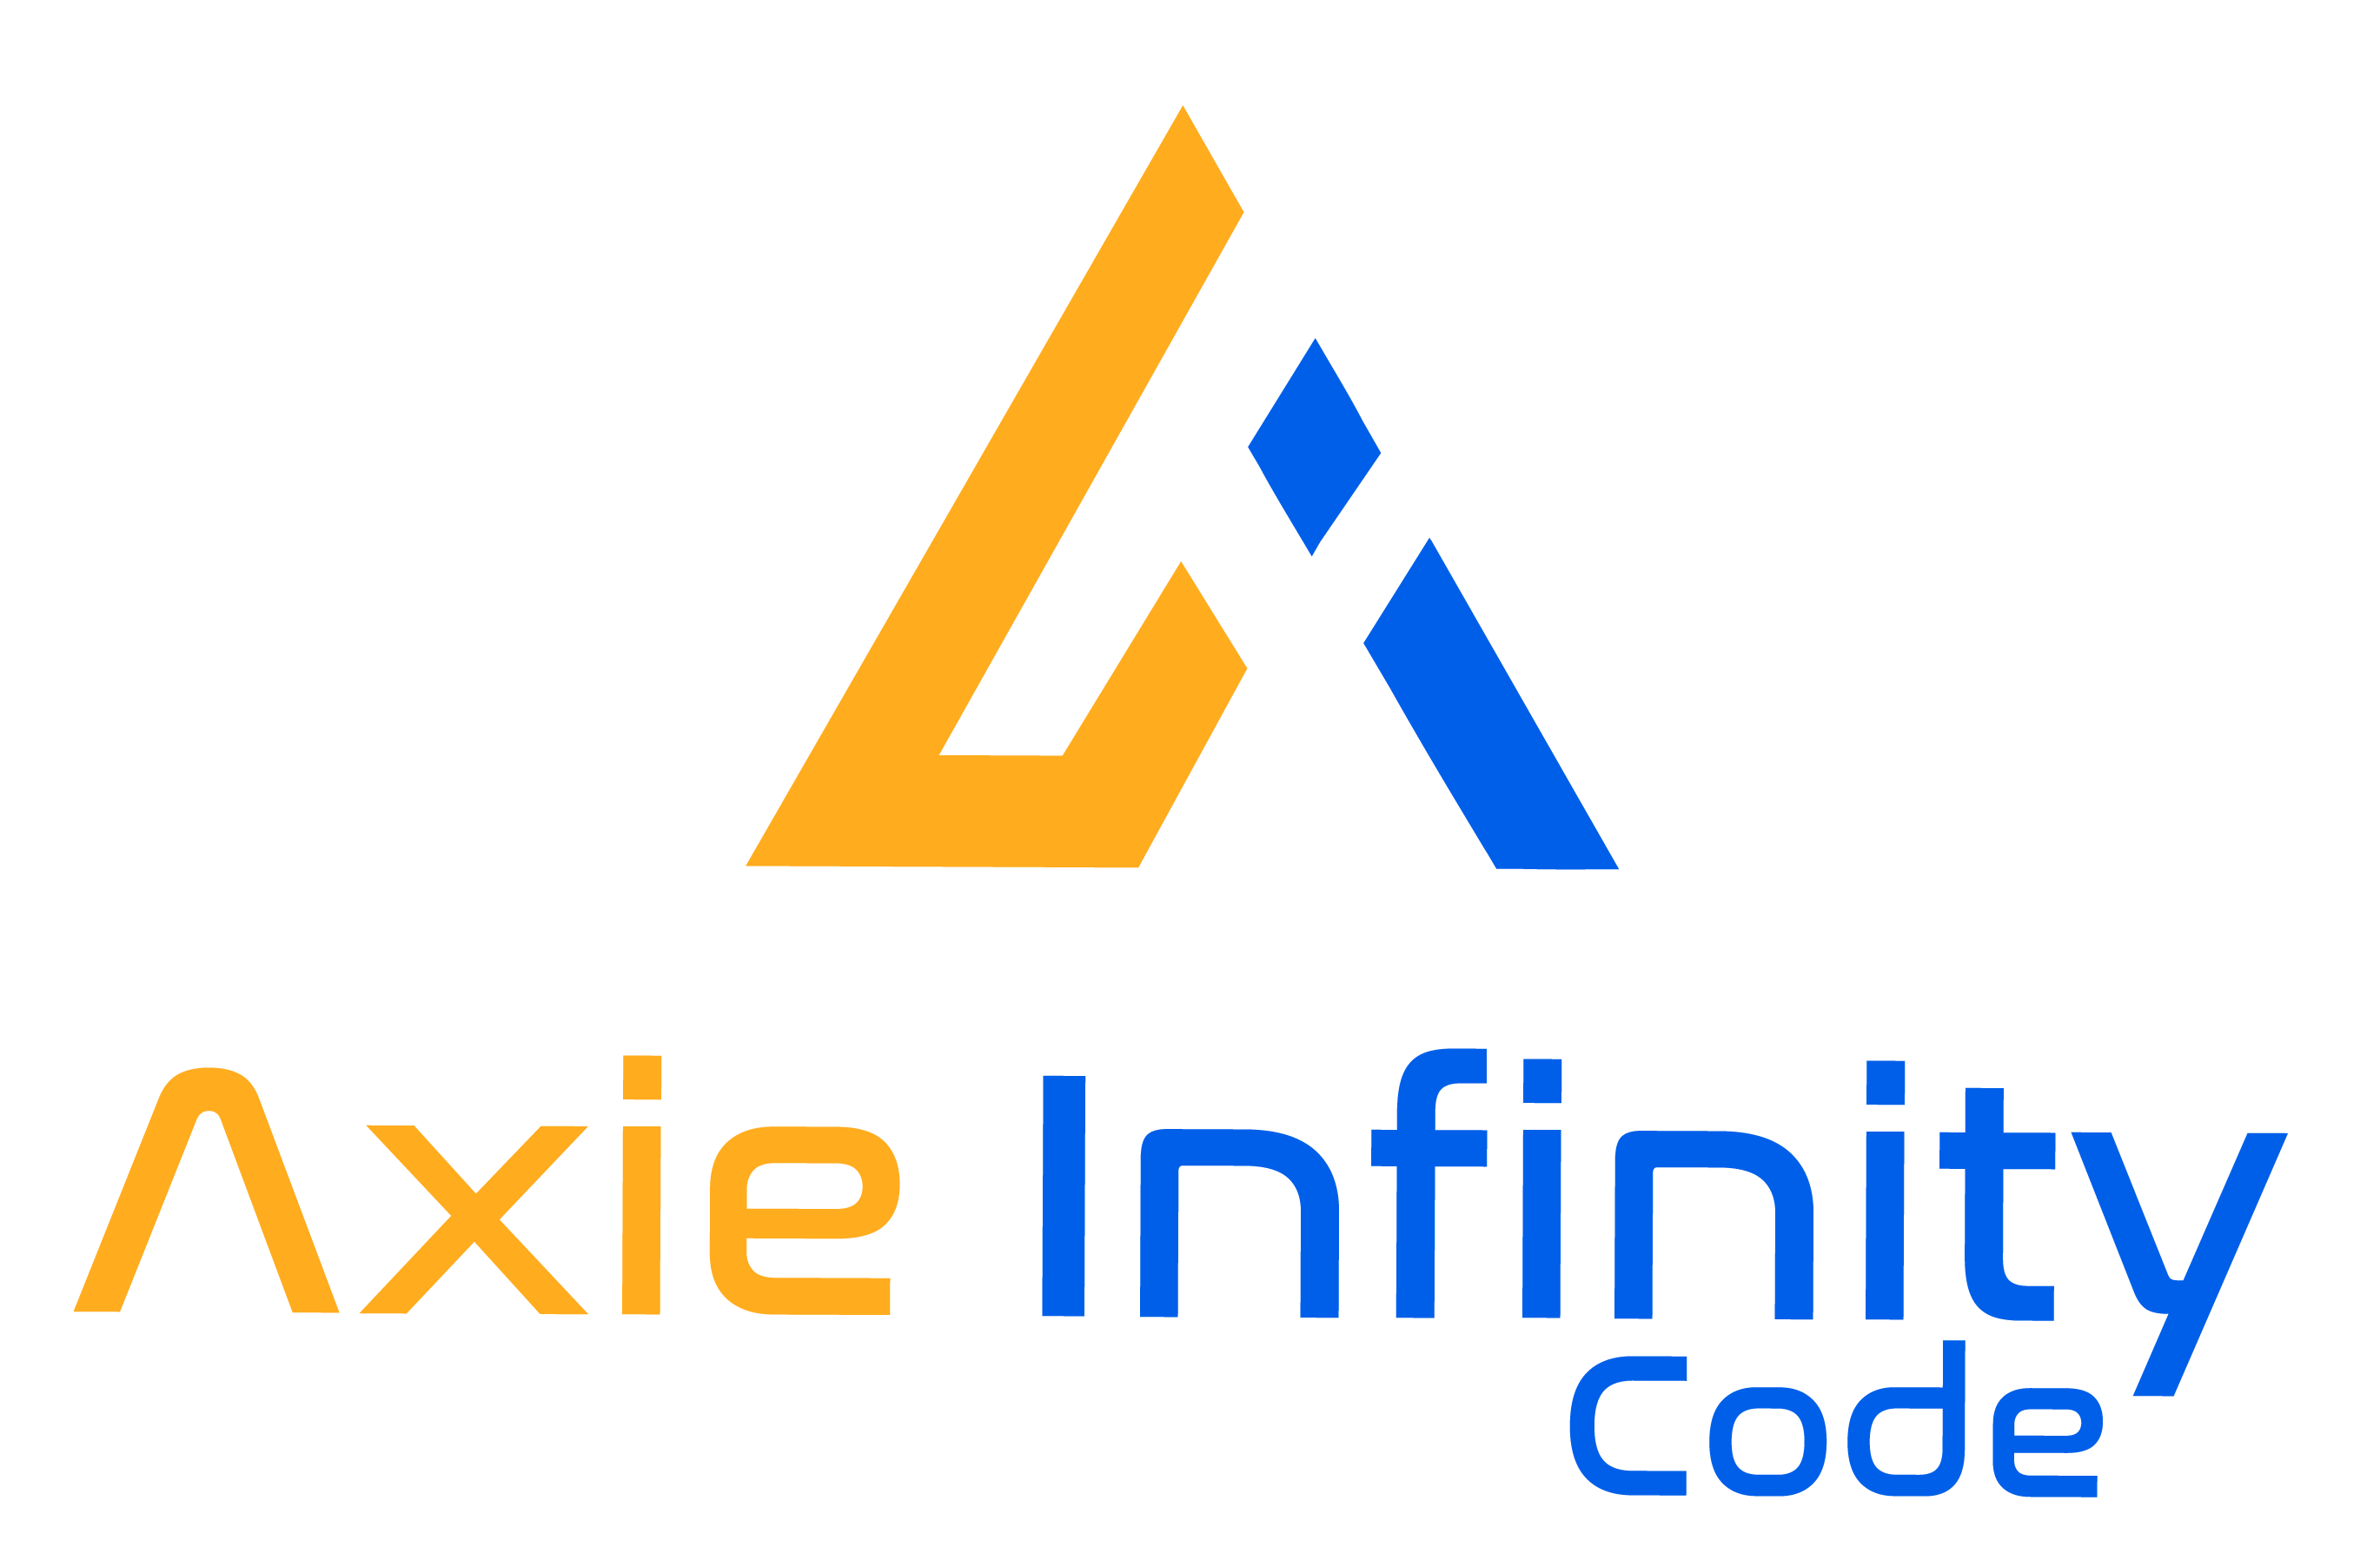 Axie Infinity Code - OPEN A FREE TRADE ACCOUNT WITH Axie Infinity Code